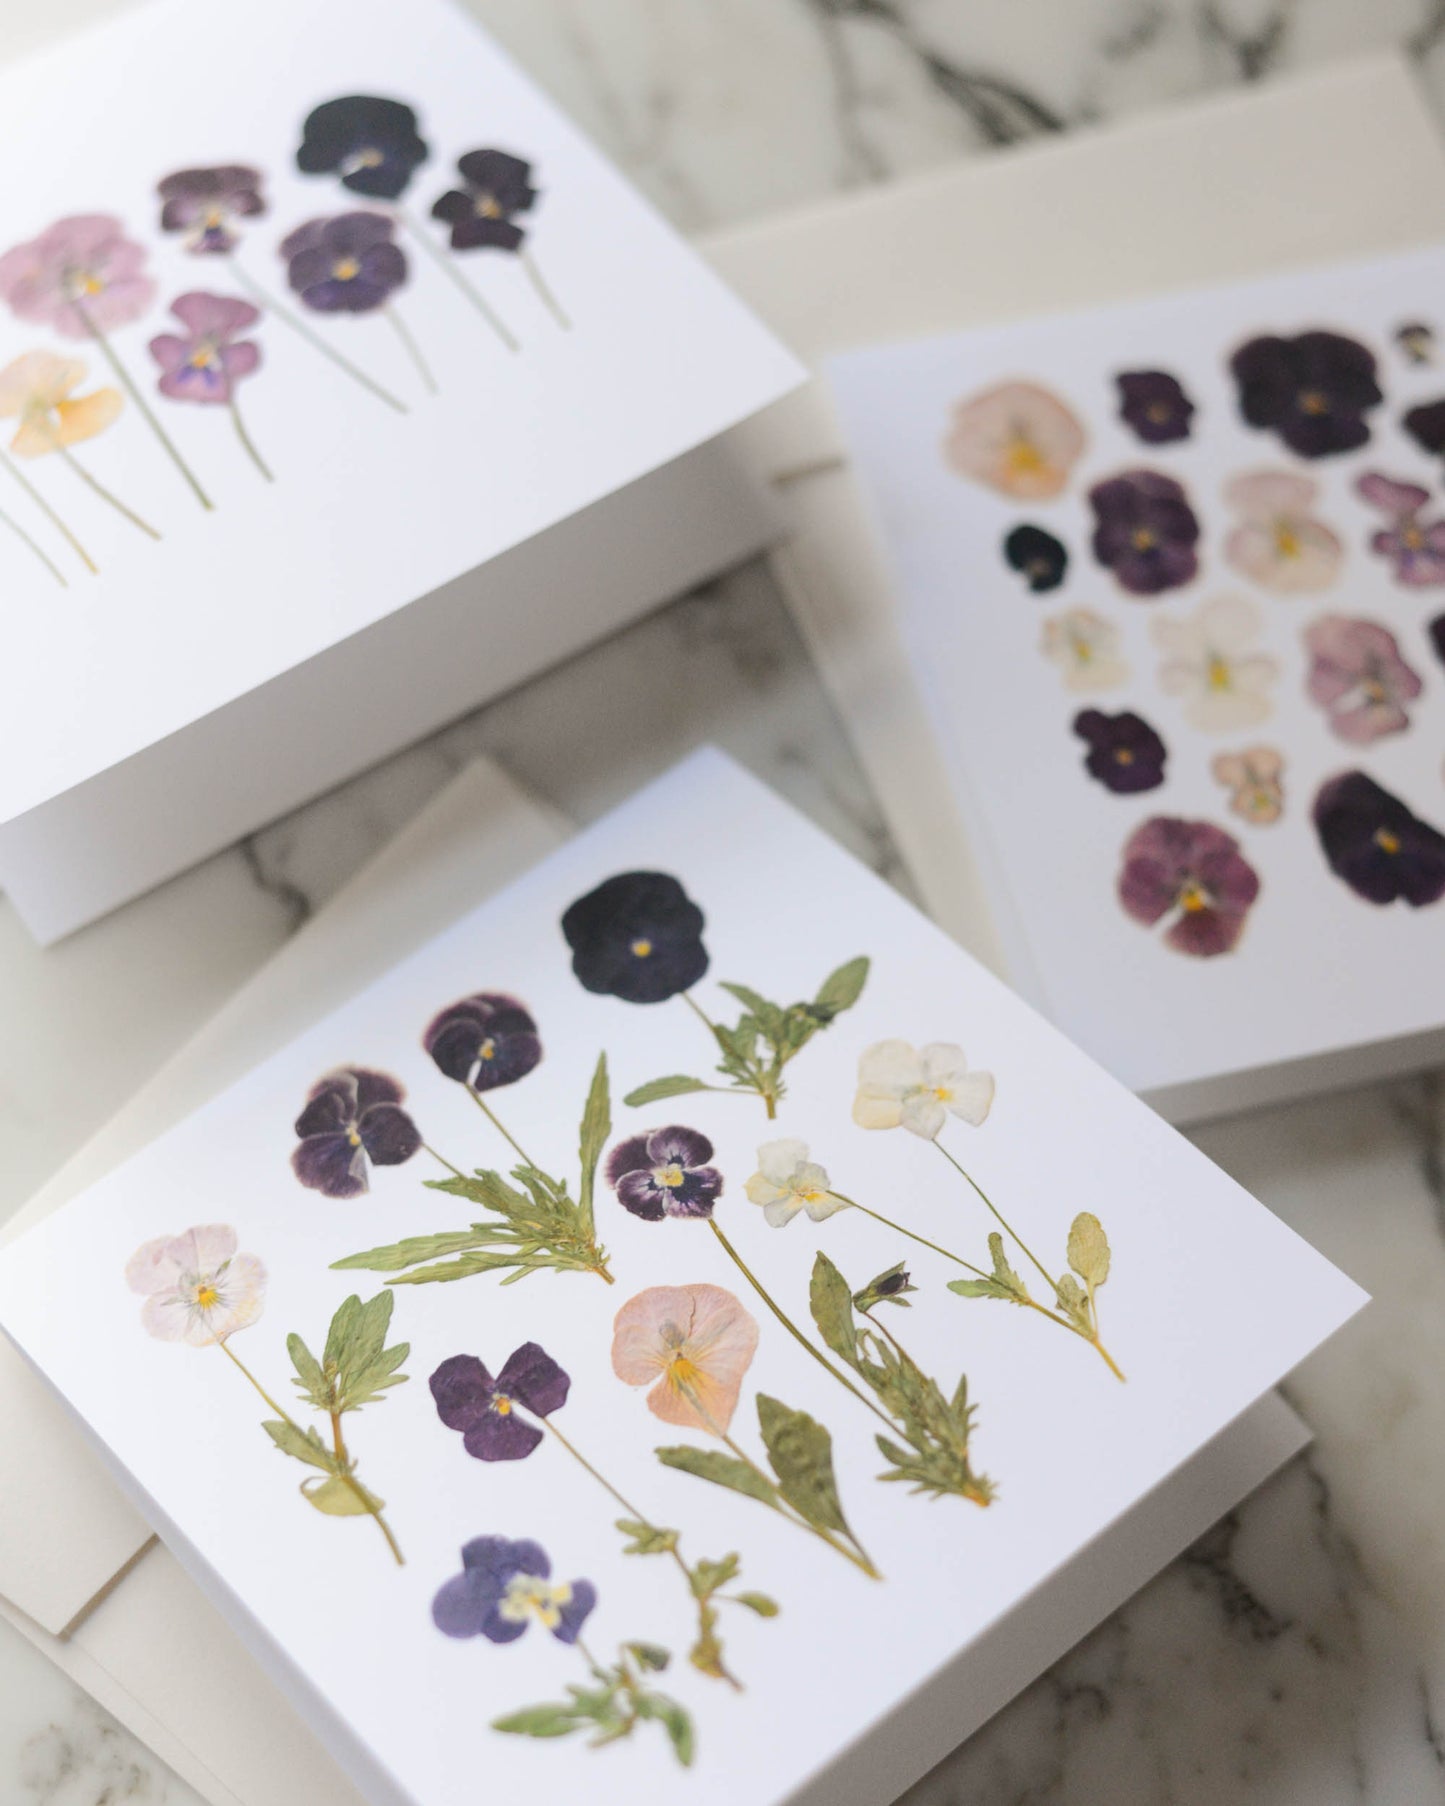 Violas - Blank Greeting Cards, set of 3+ with envelopes